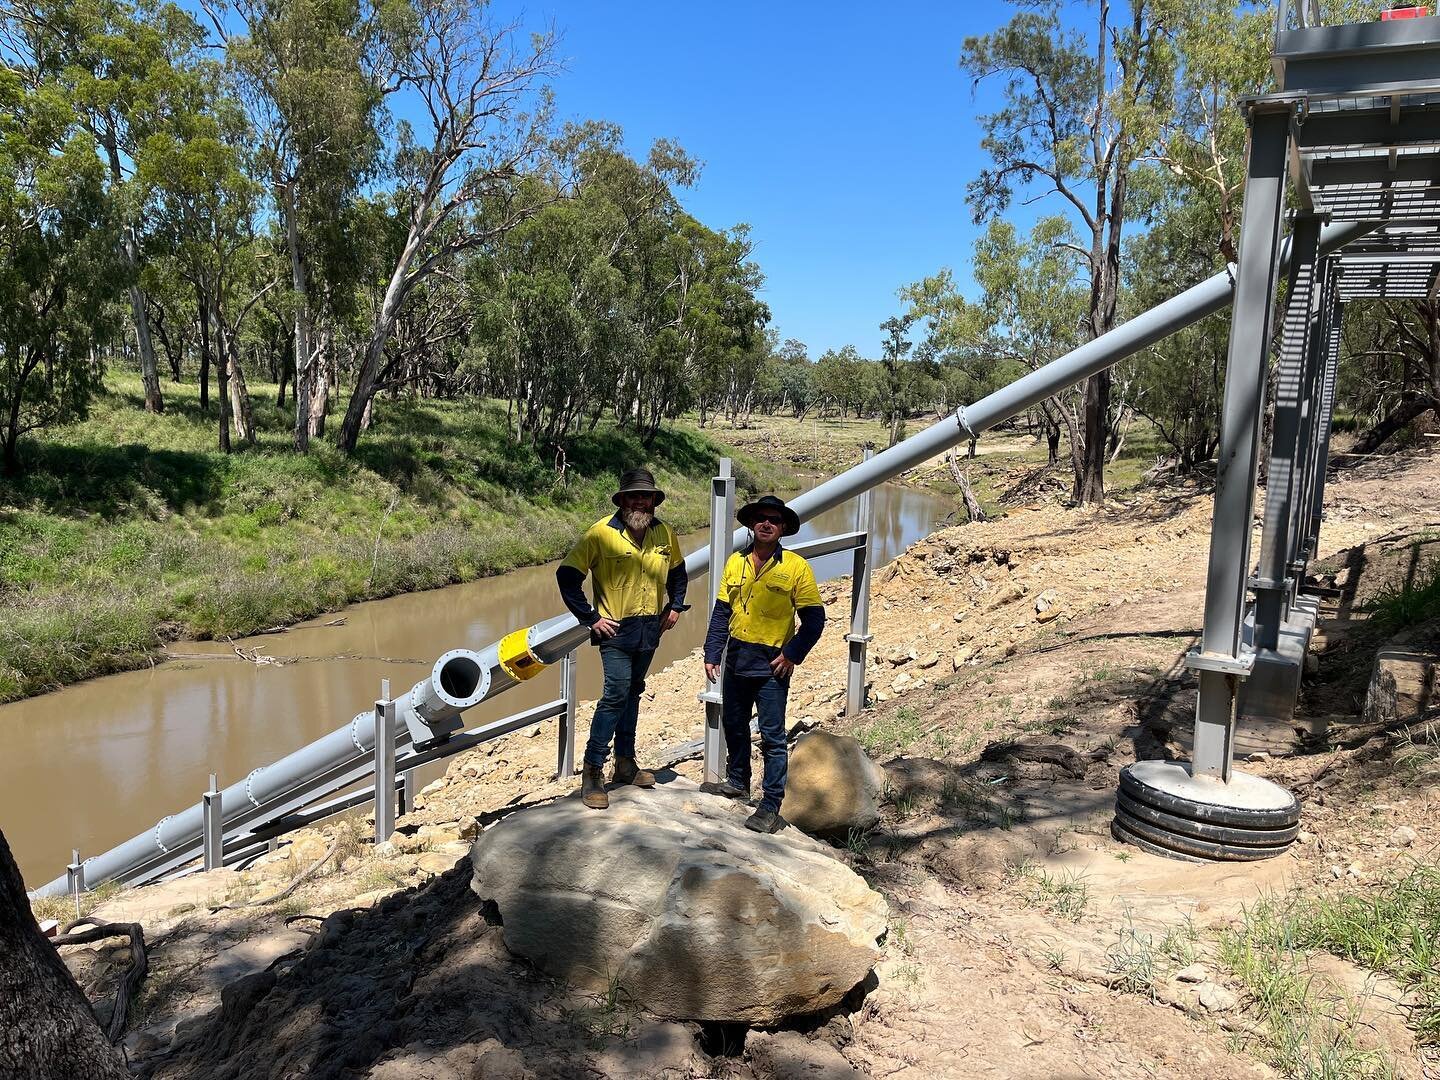 An awesome Ornel axial flow river pump install from the team. Nice work!!! #ornelpumps #agriculture #aussiemanufacturing #engineering